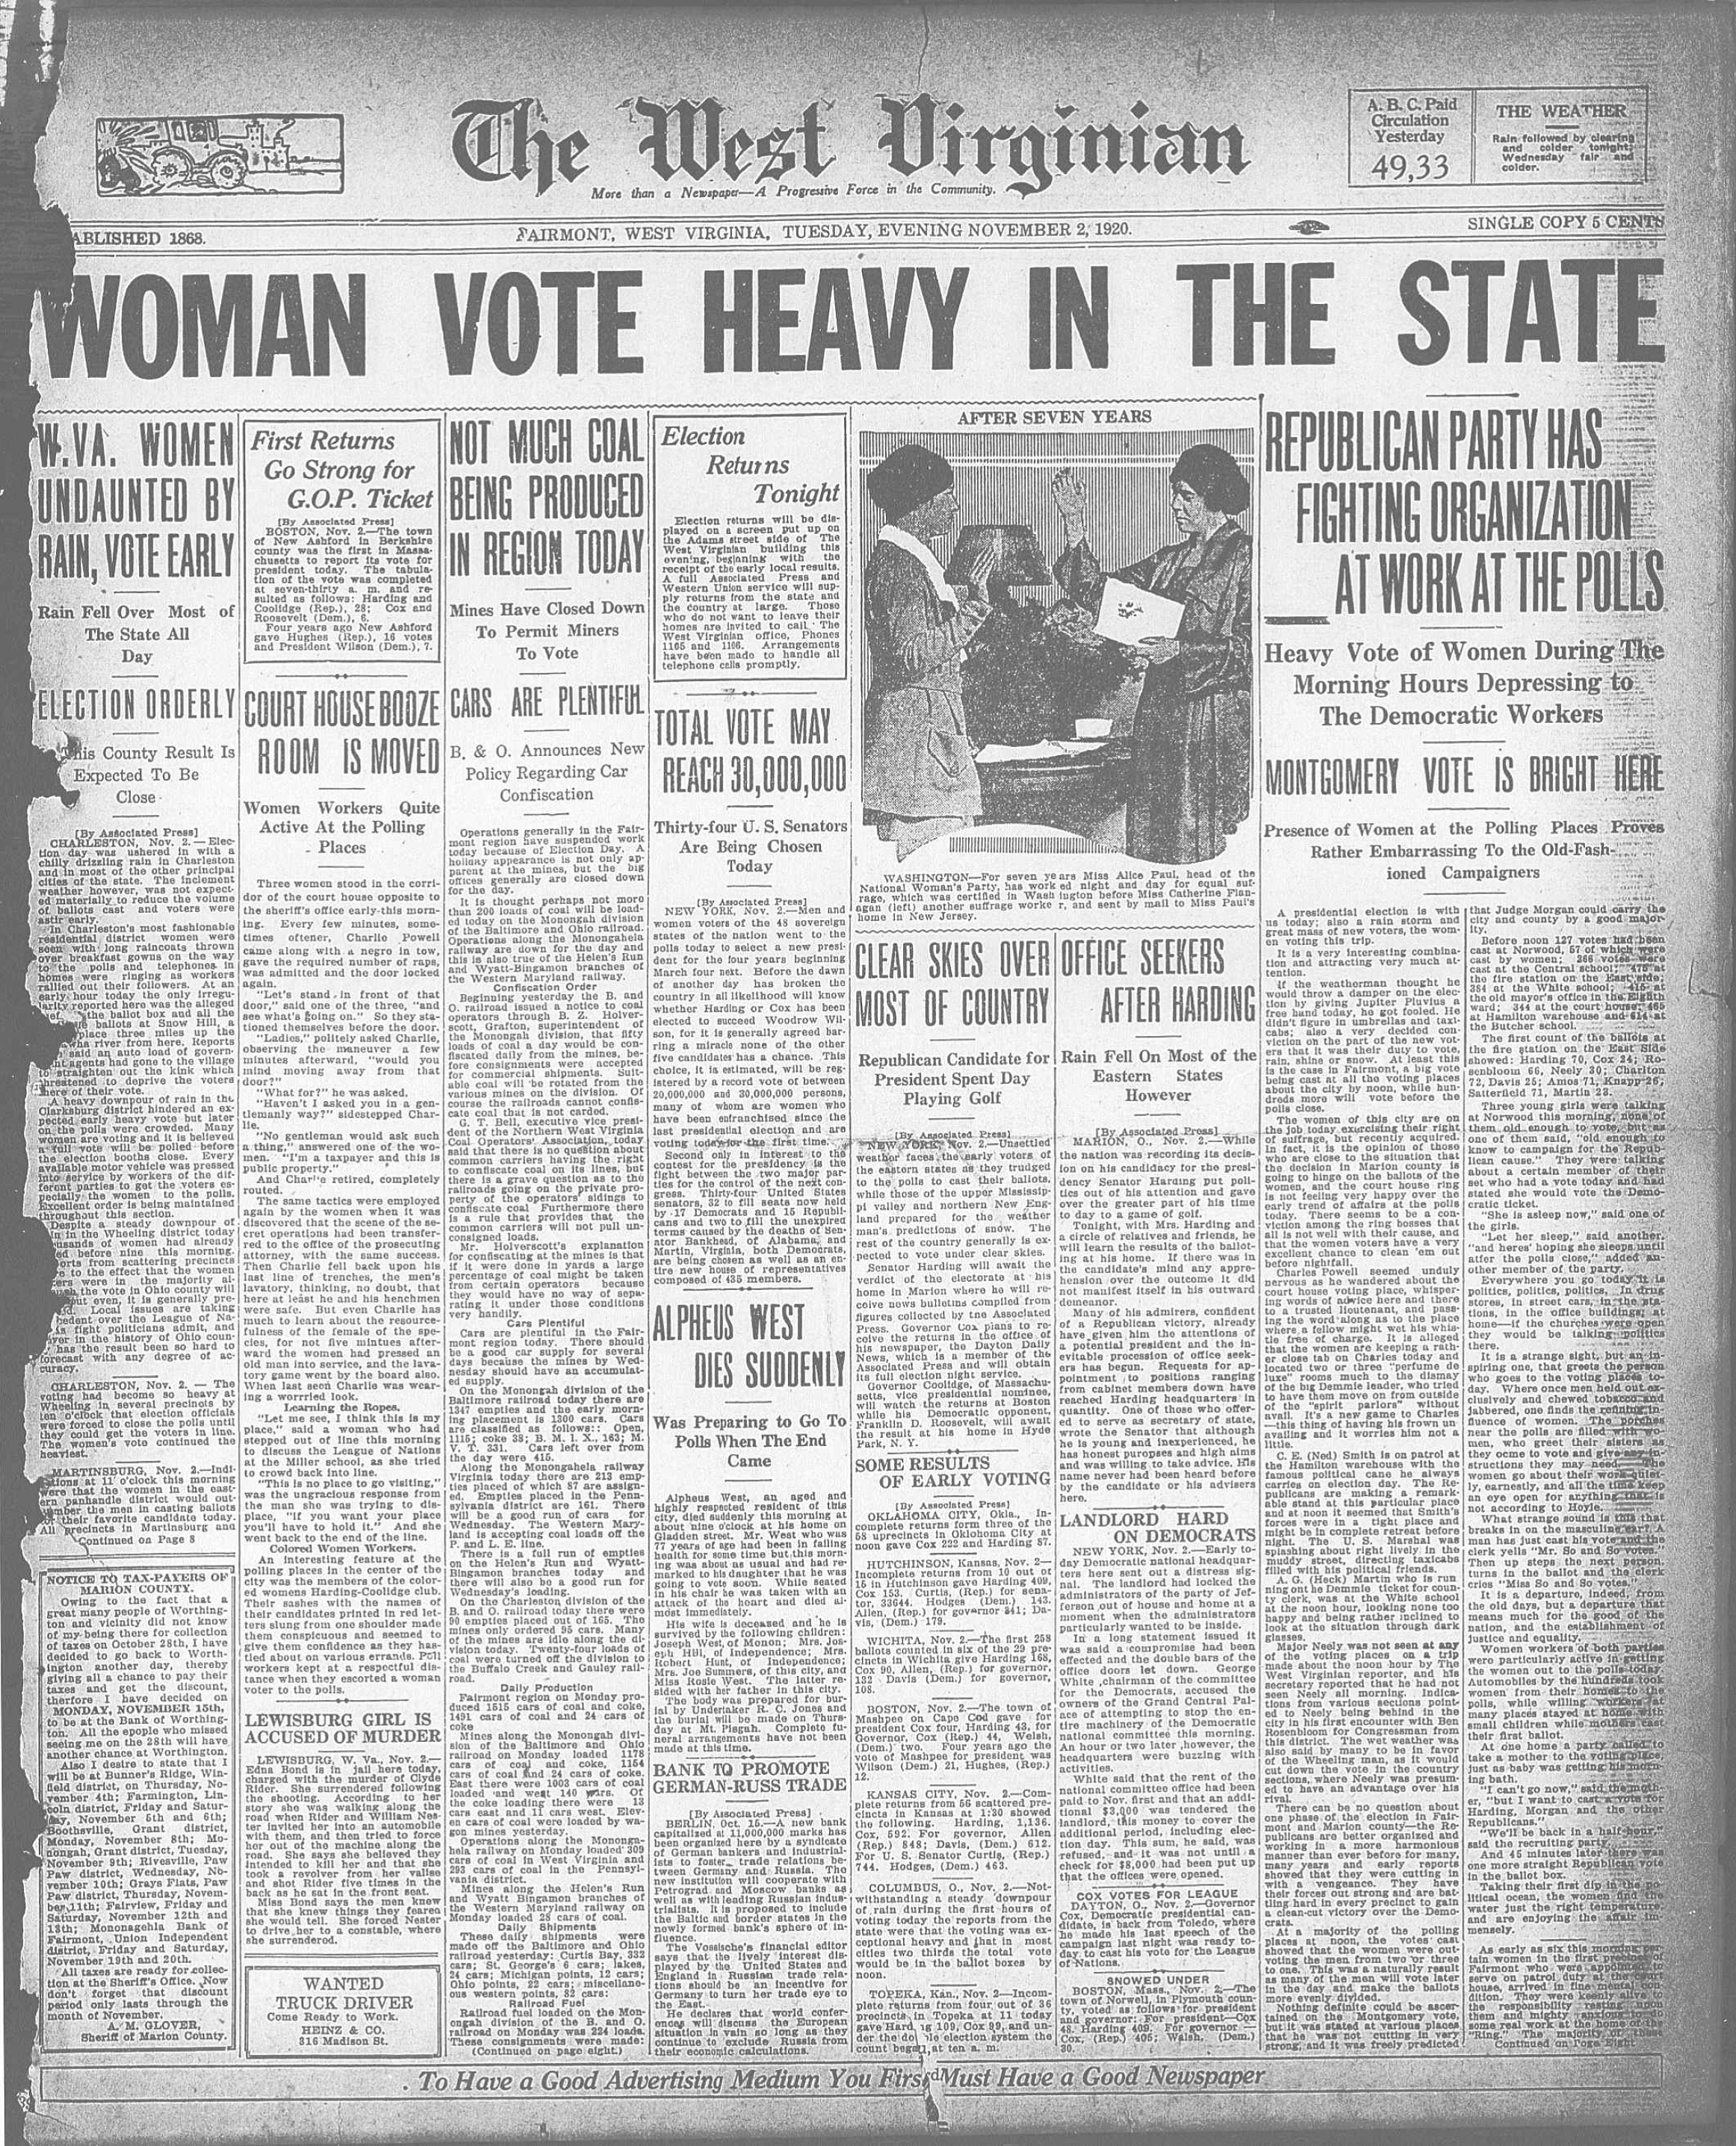 Frontpage of “The West Virginian” newspaper on Election Day in 1920, the first election women could vote in. The main headline reads: “Women Vote Heavy in the State.”